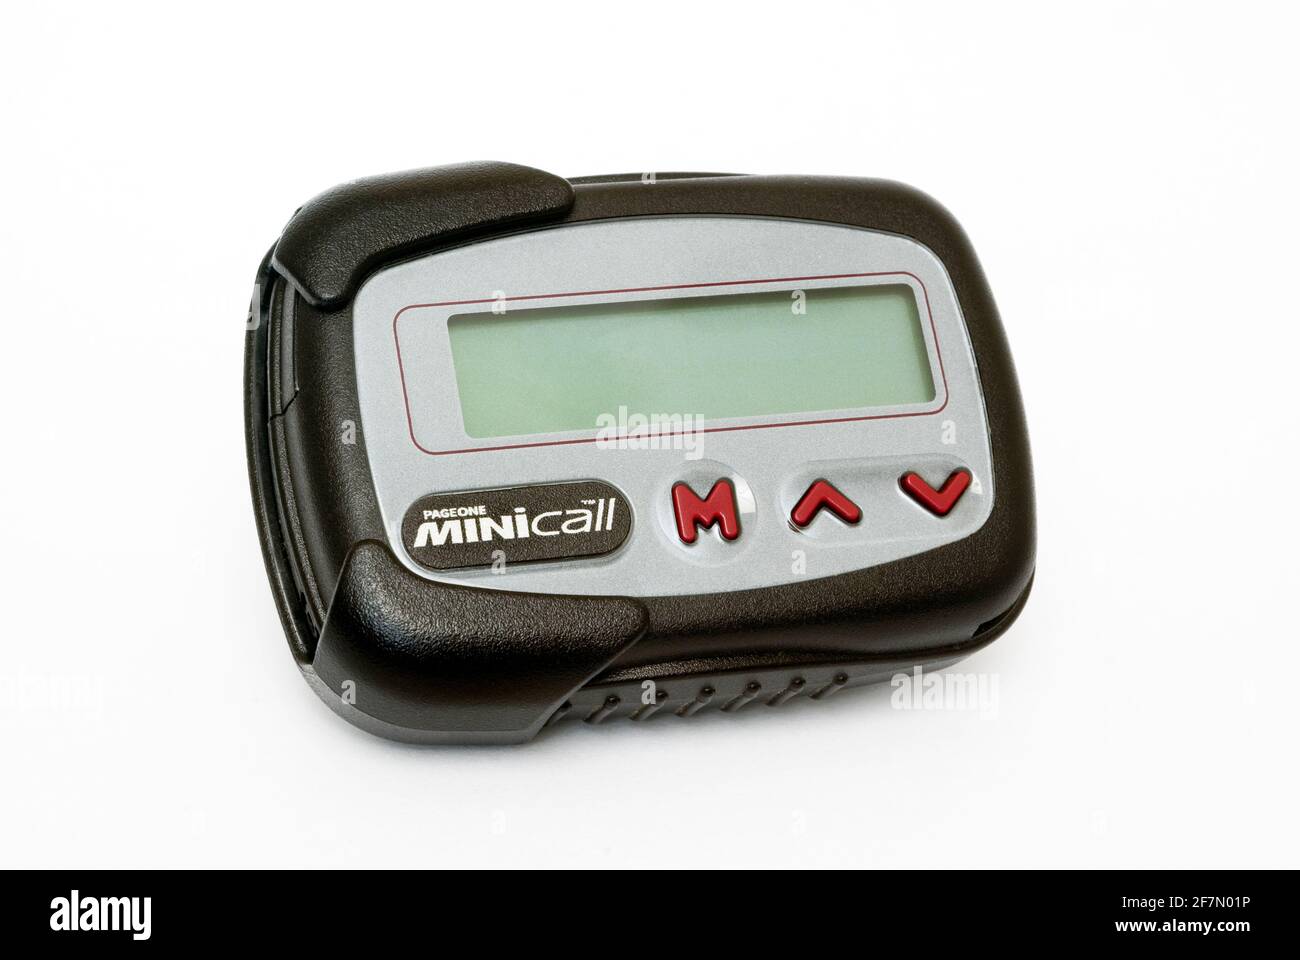 Old Minicall Pager Stock Photo